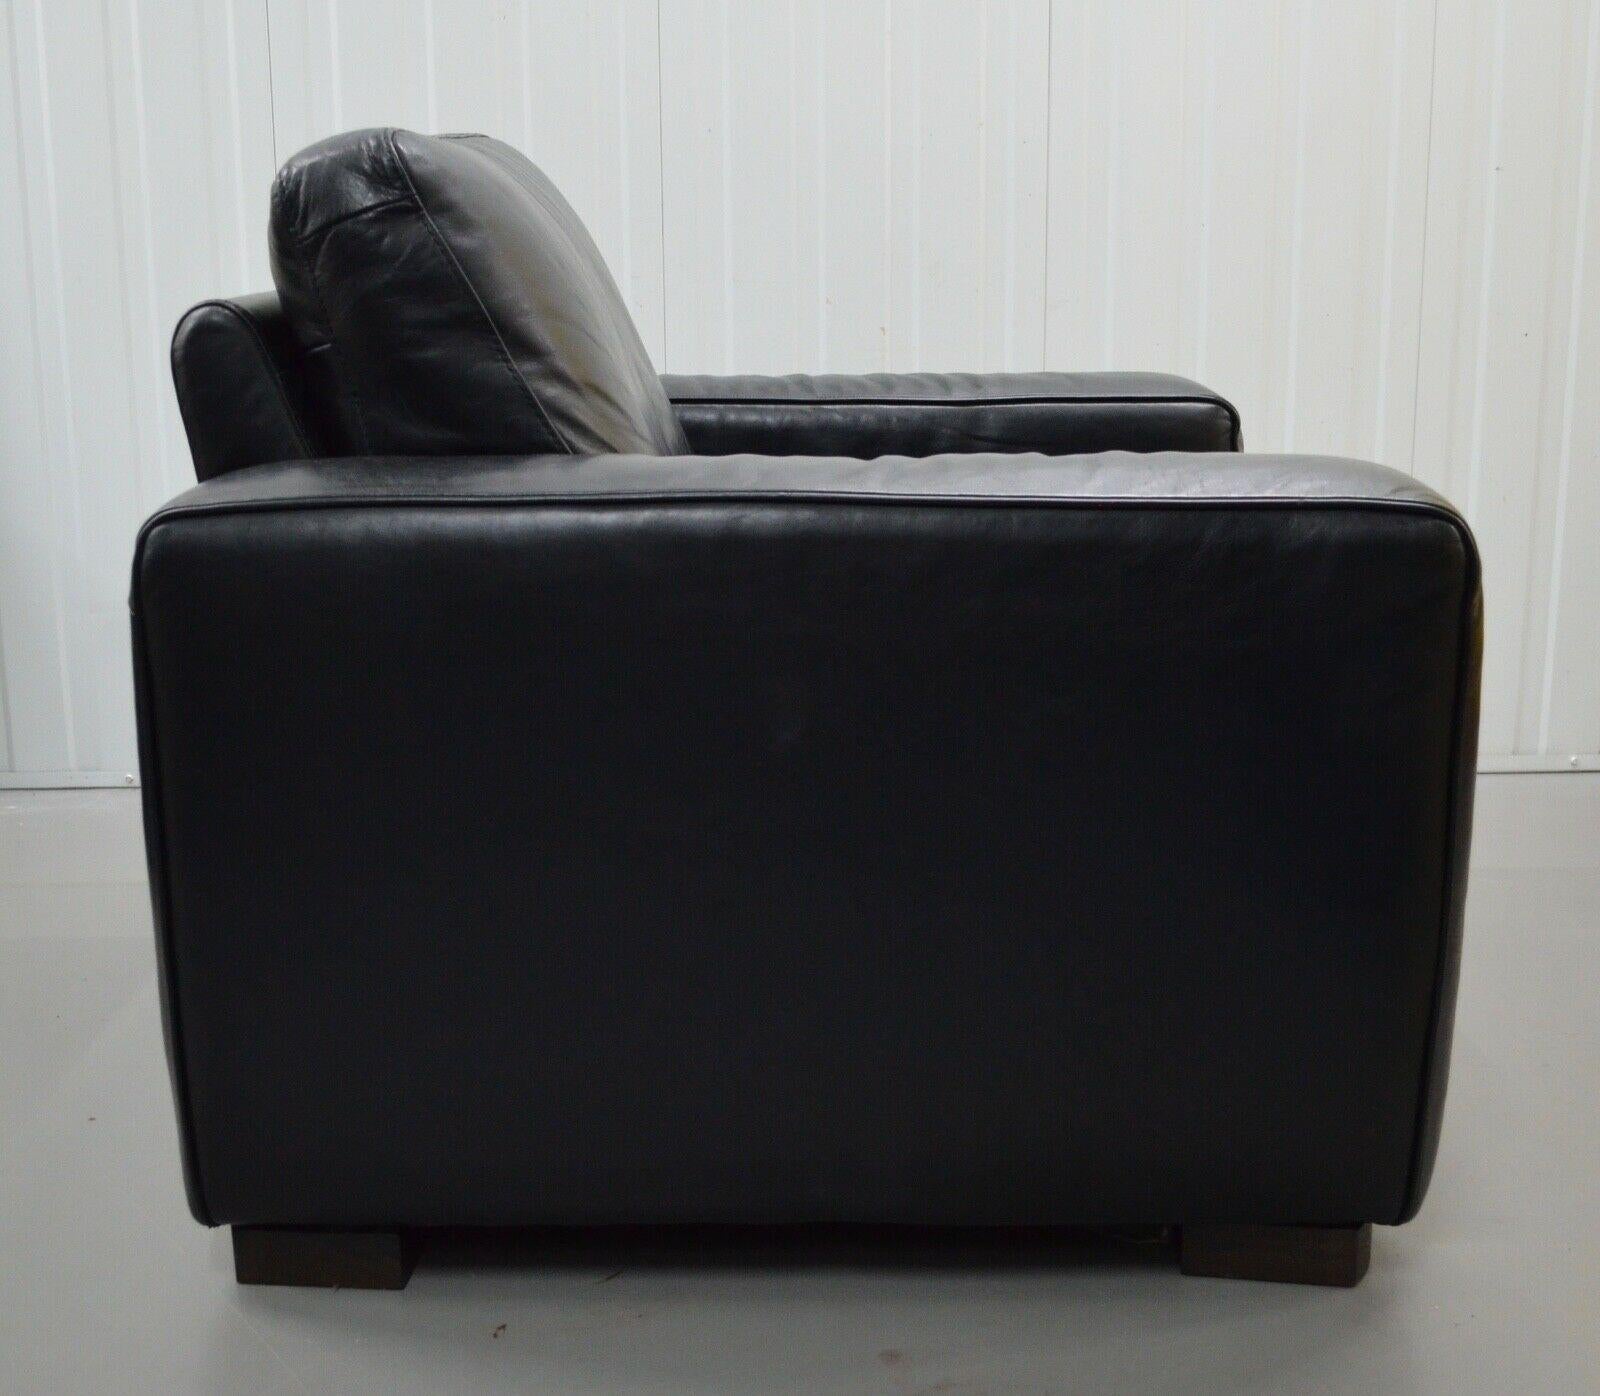 1 von 2 FINE NATUZZI BLACK LEATHER TWO SEATER SOFAS MATCING ARMCHAIR AVAILABLE im Angebot 4